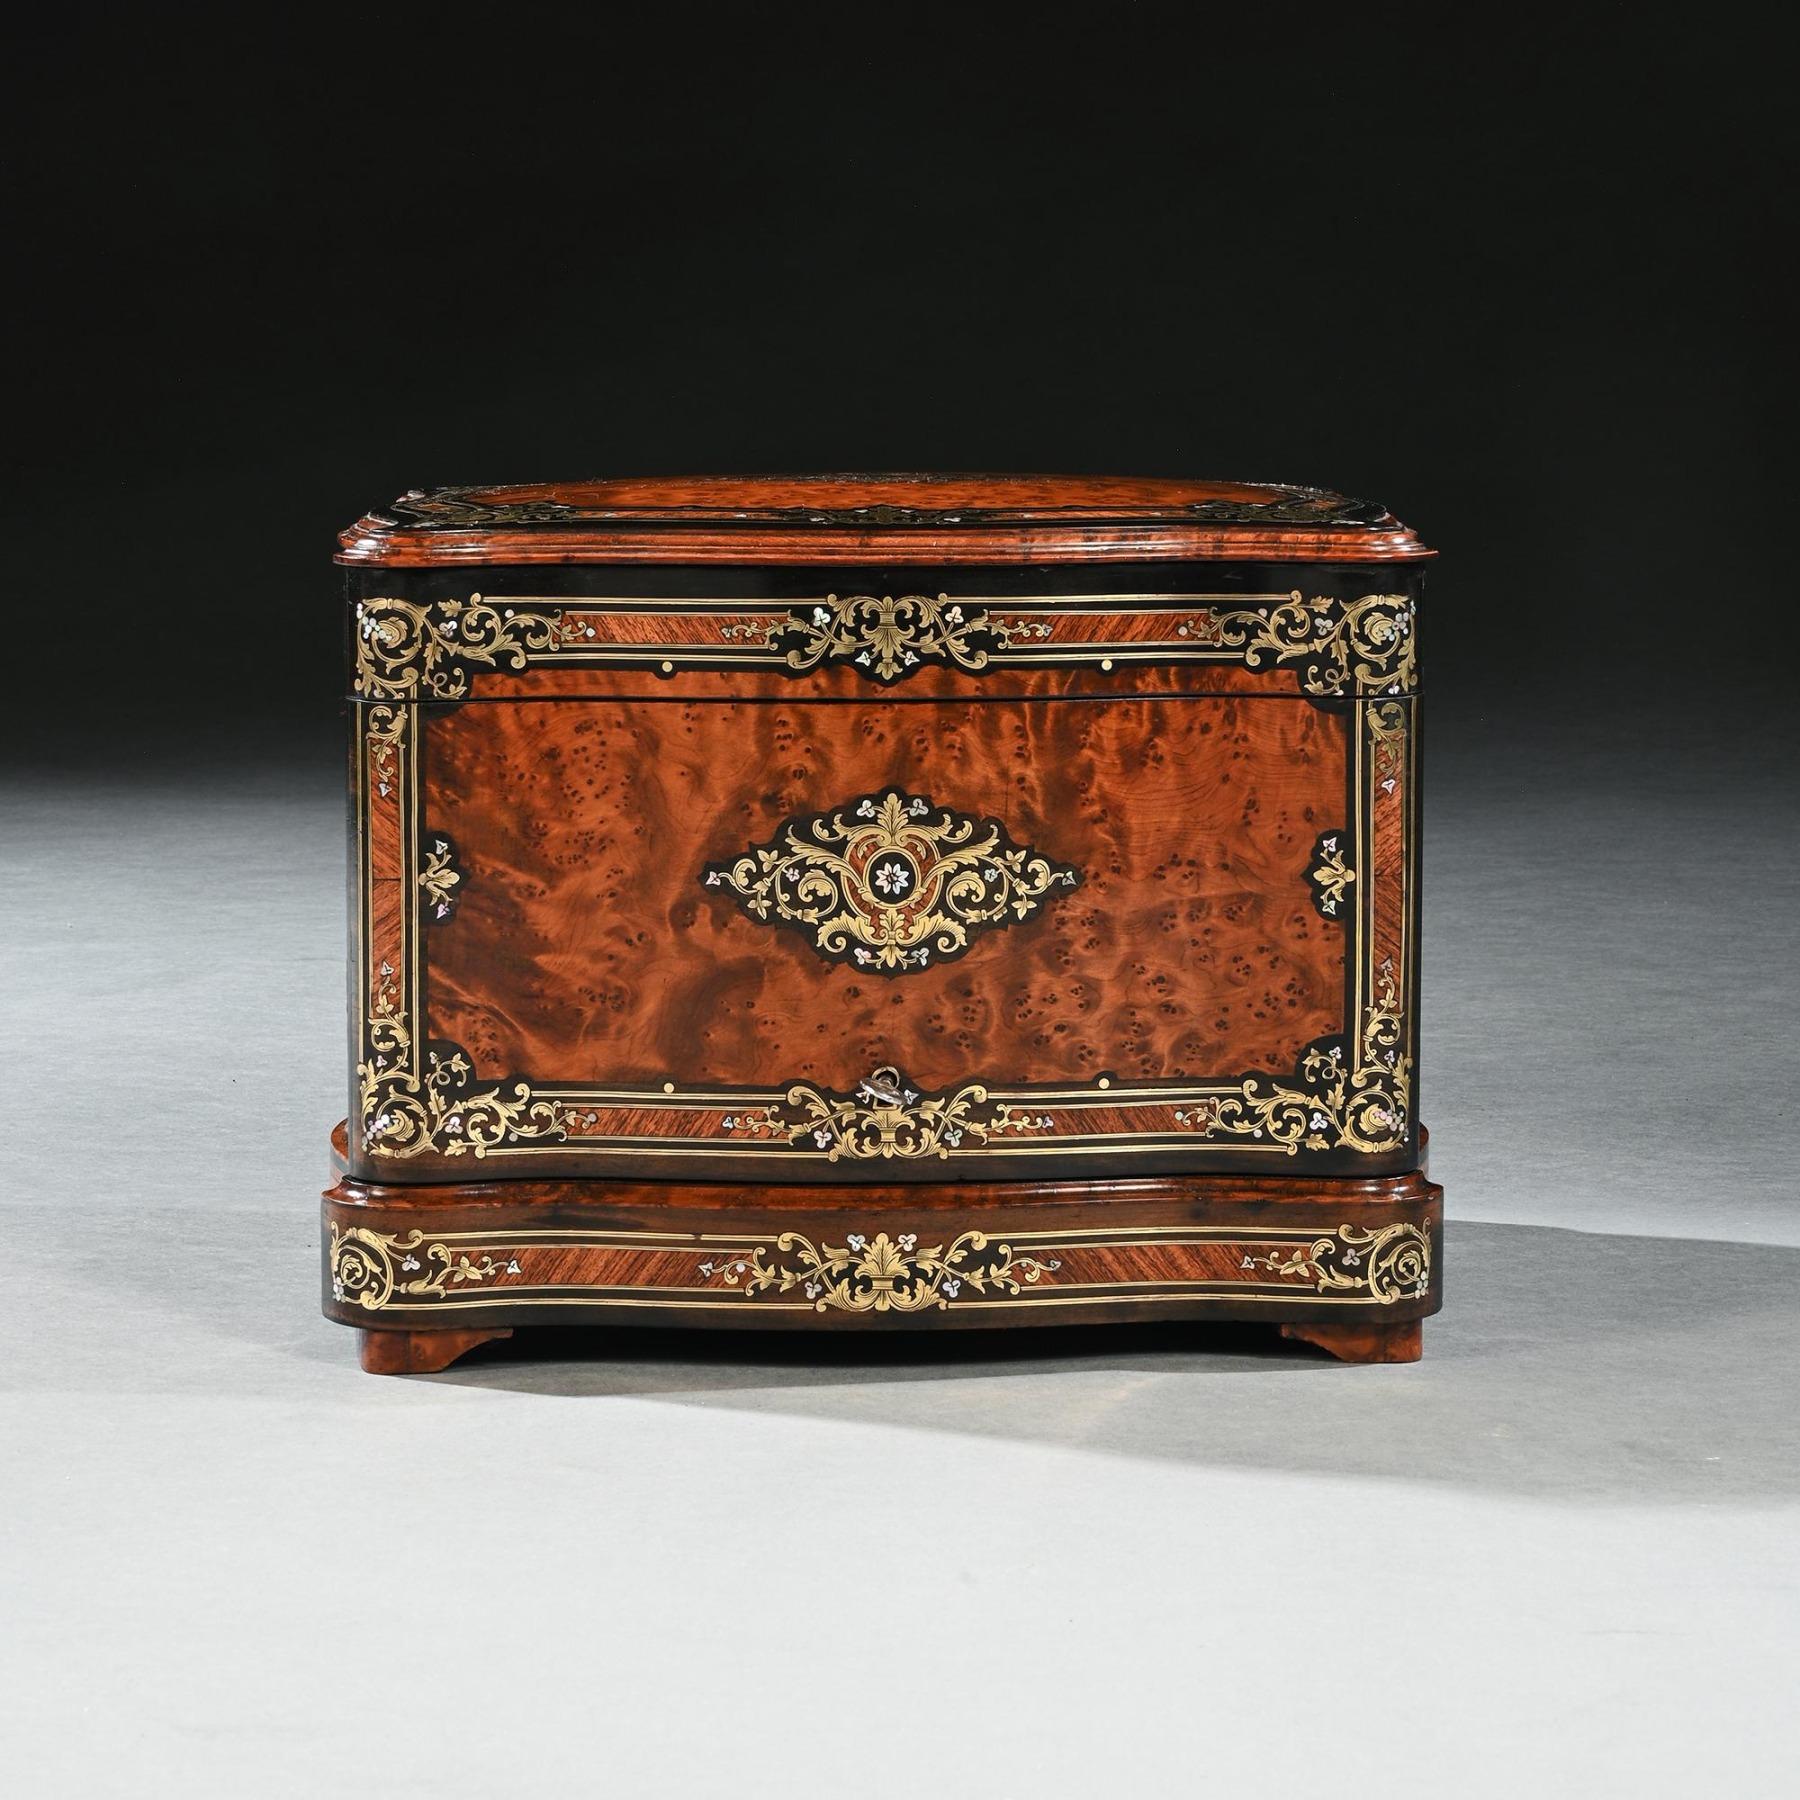 French Thuya And Brass Inlaid Serpentine Cave A Liqueur Or Tantalus Box In Good Condition For Sale In Benington, Herts